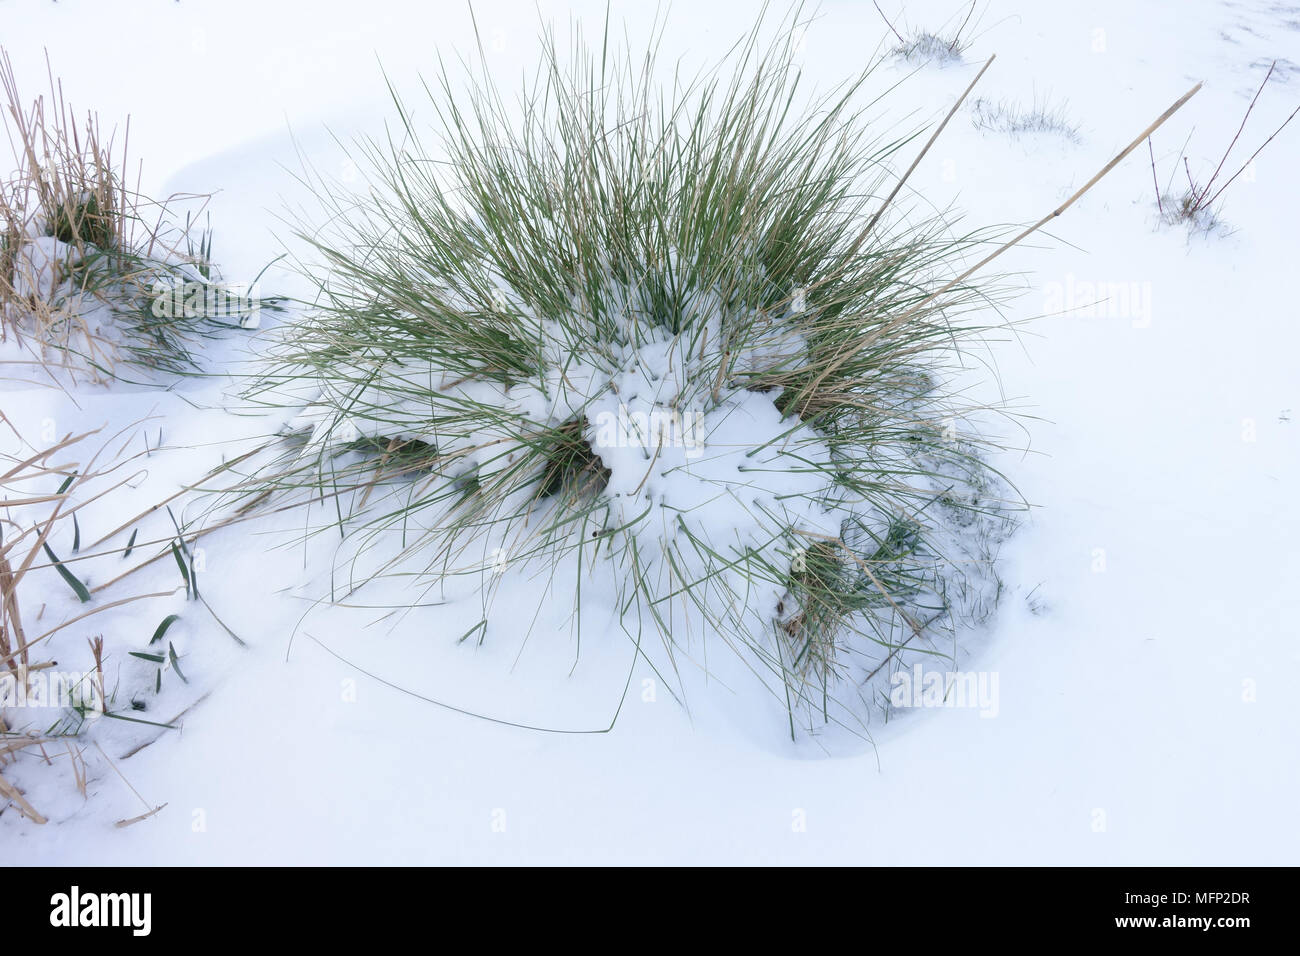 Fresh deep snow covering on golden oats or giant feather grass, Stipa gigantea,  on a cold grey winter day in March Stock Photo